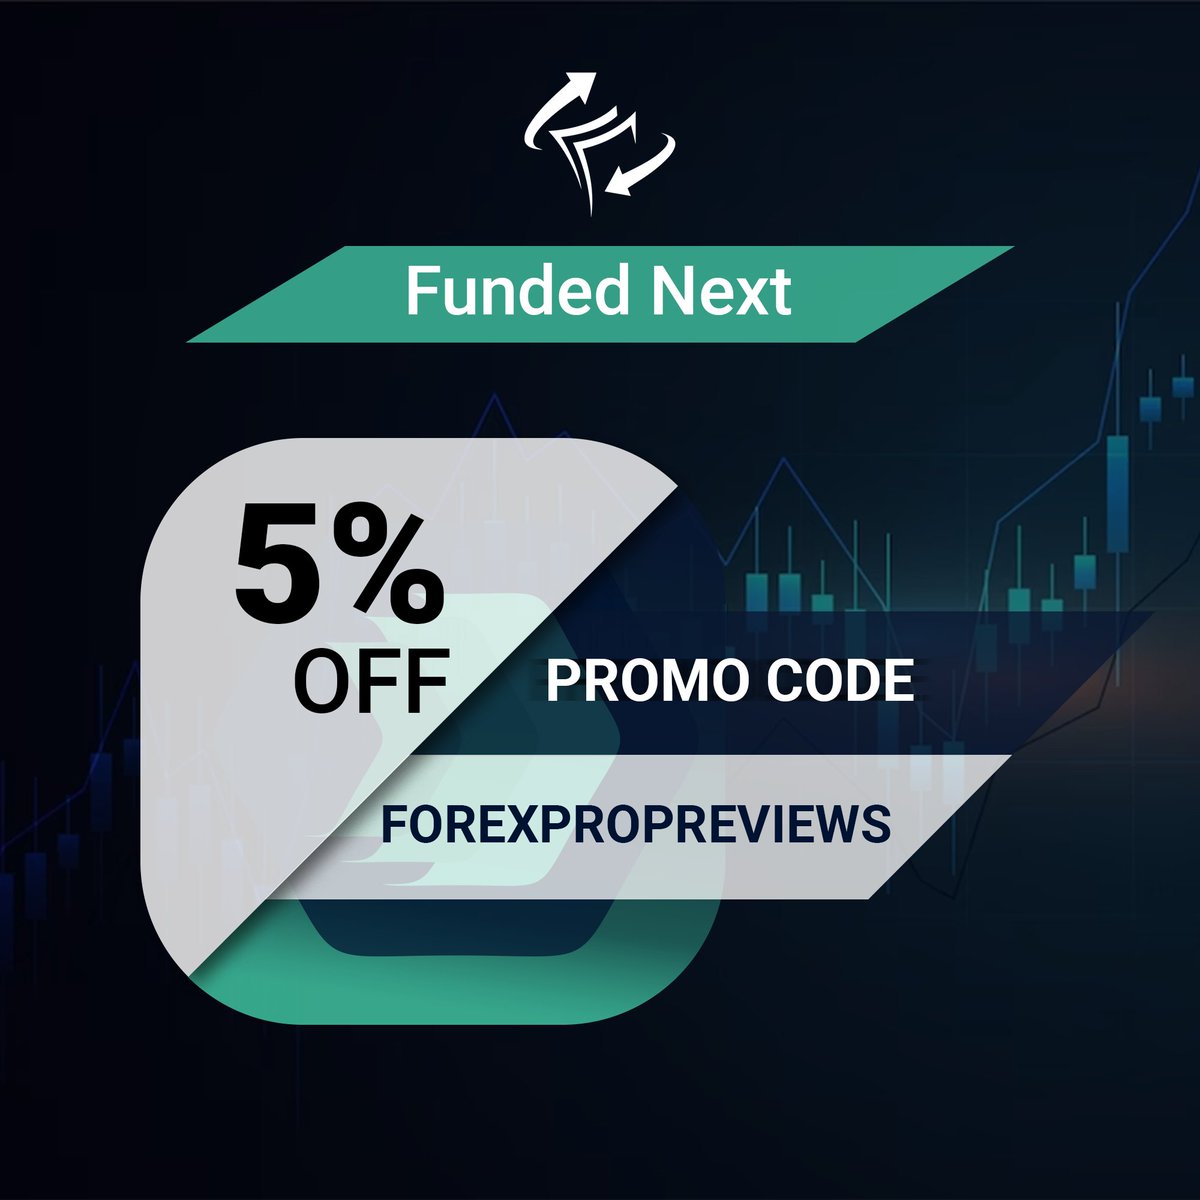 🚀 Ready to take your trading to the next level? Dive into FundedNext 5% discount by using code 'FOREXPROPREVIEWS.' Enjoy funded accounts up to $300k and a profit-sharing of up to 95%. Start trading like a pro today! 💰
#PropFirm #Forex #FundedNext #ForexTrading